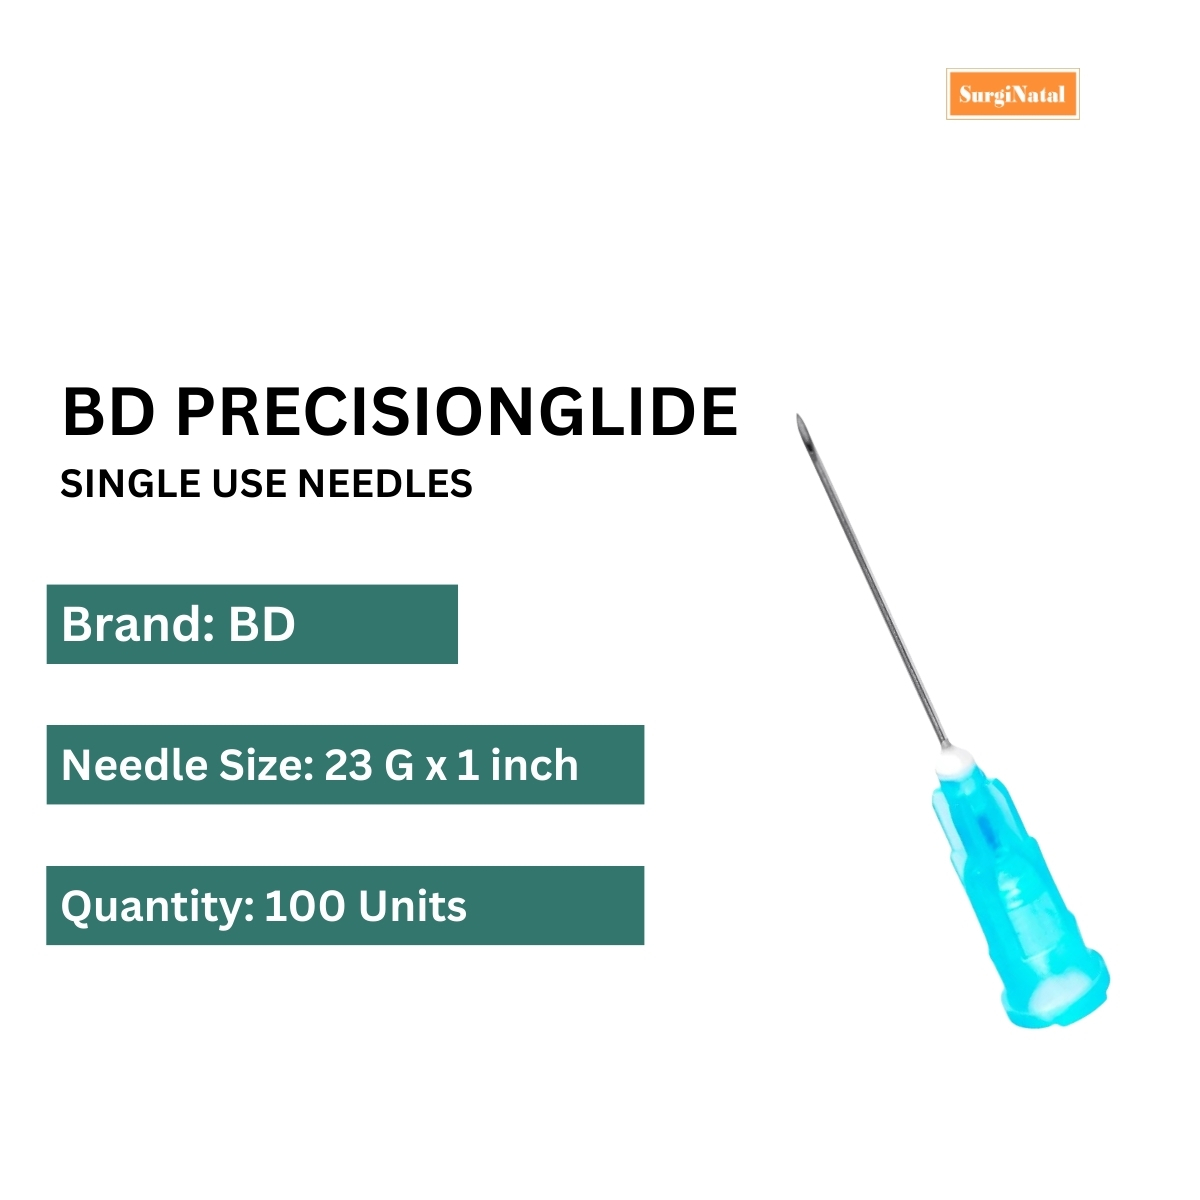 bd needles precisionglide 23g*1 inch - 100 units pack